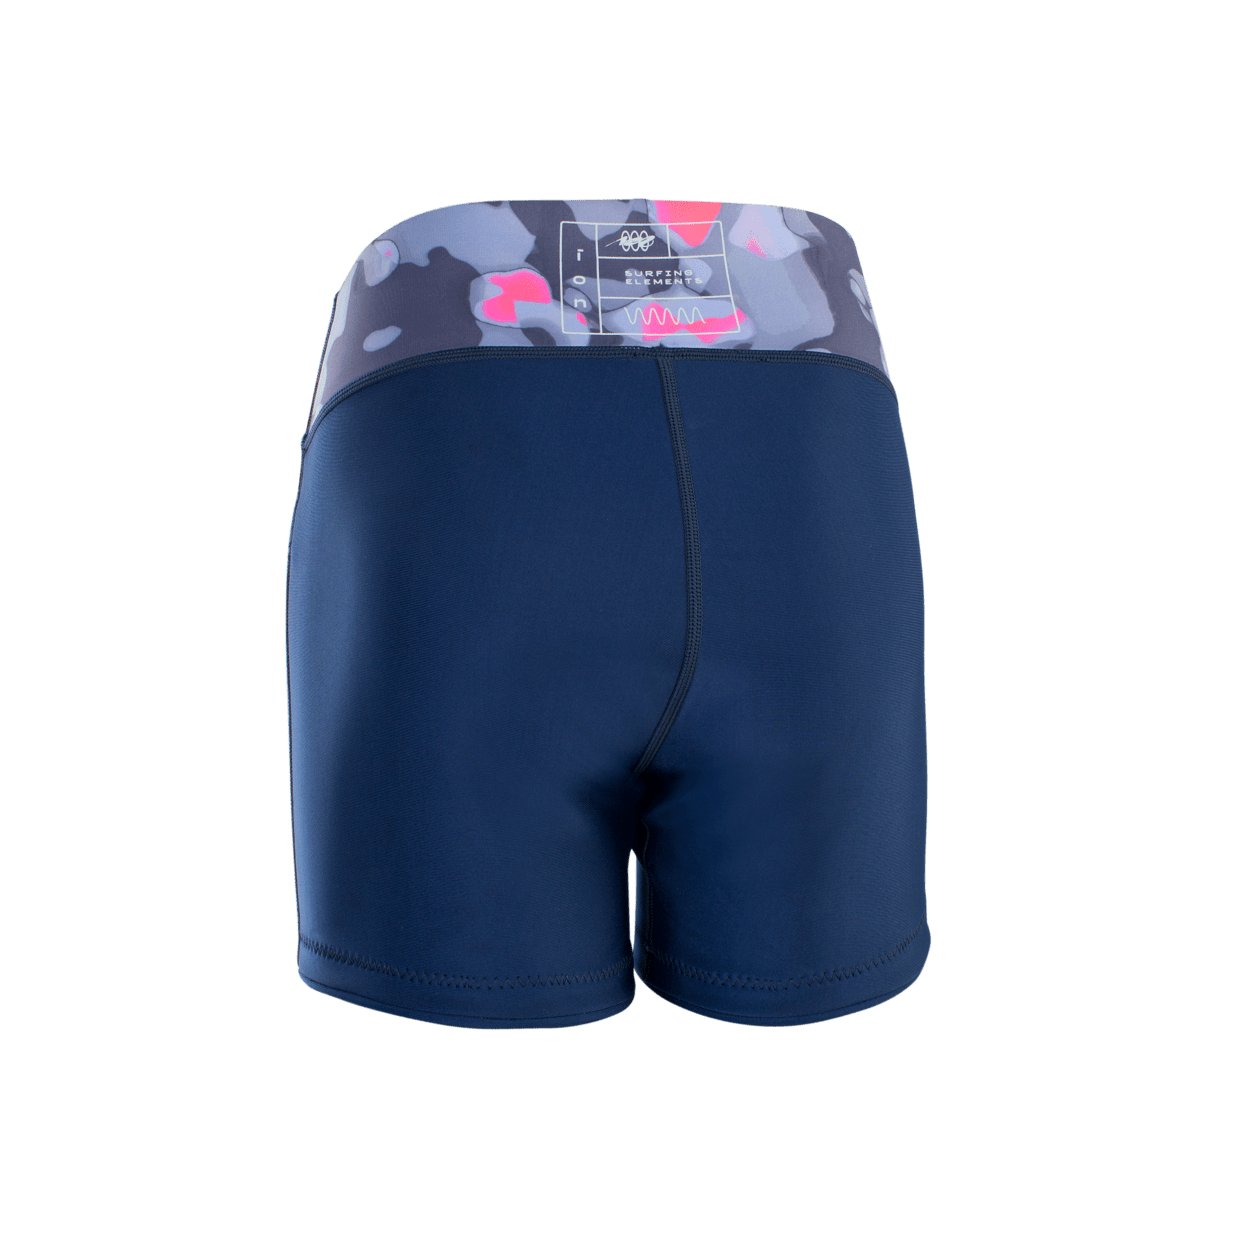 ION Neo Shorts Womens 2022 - Worthing Watersports - 9010583052496 - Tops - ION Water